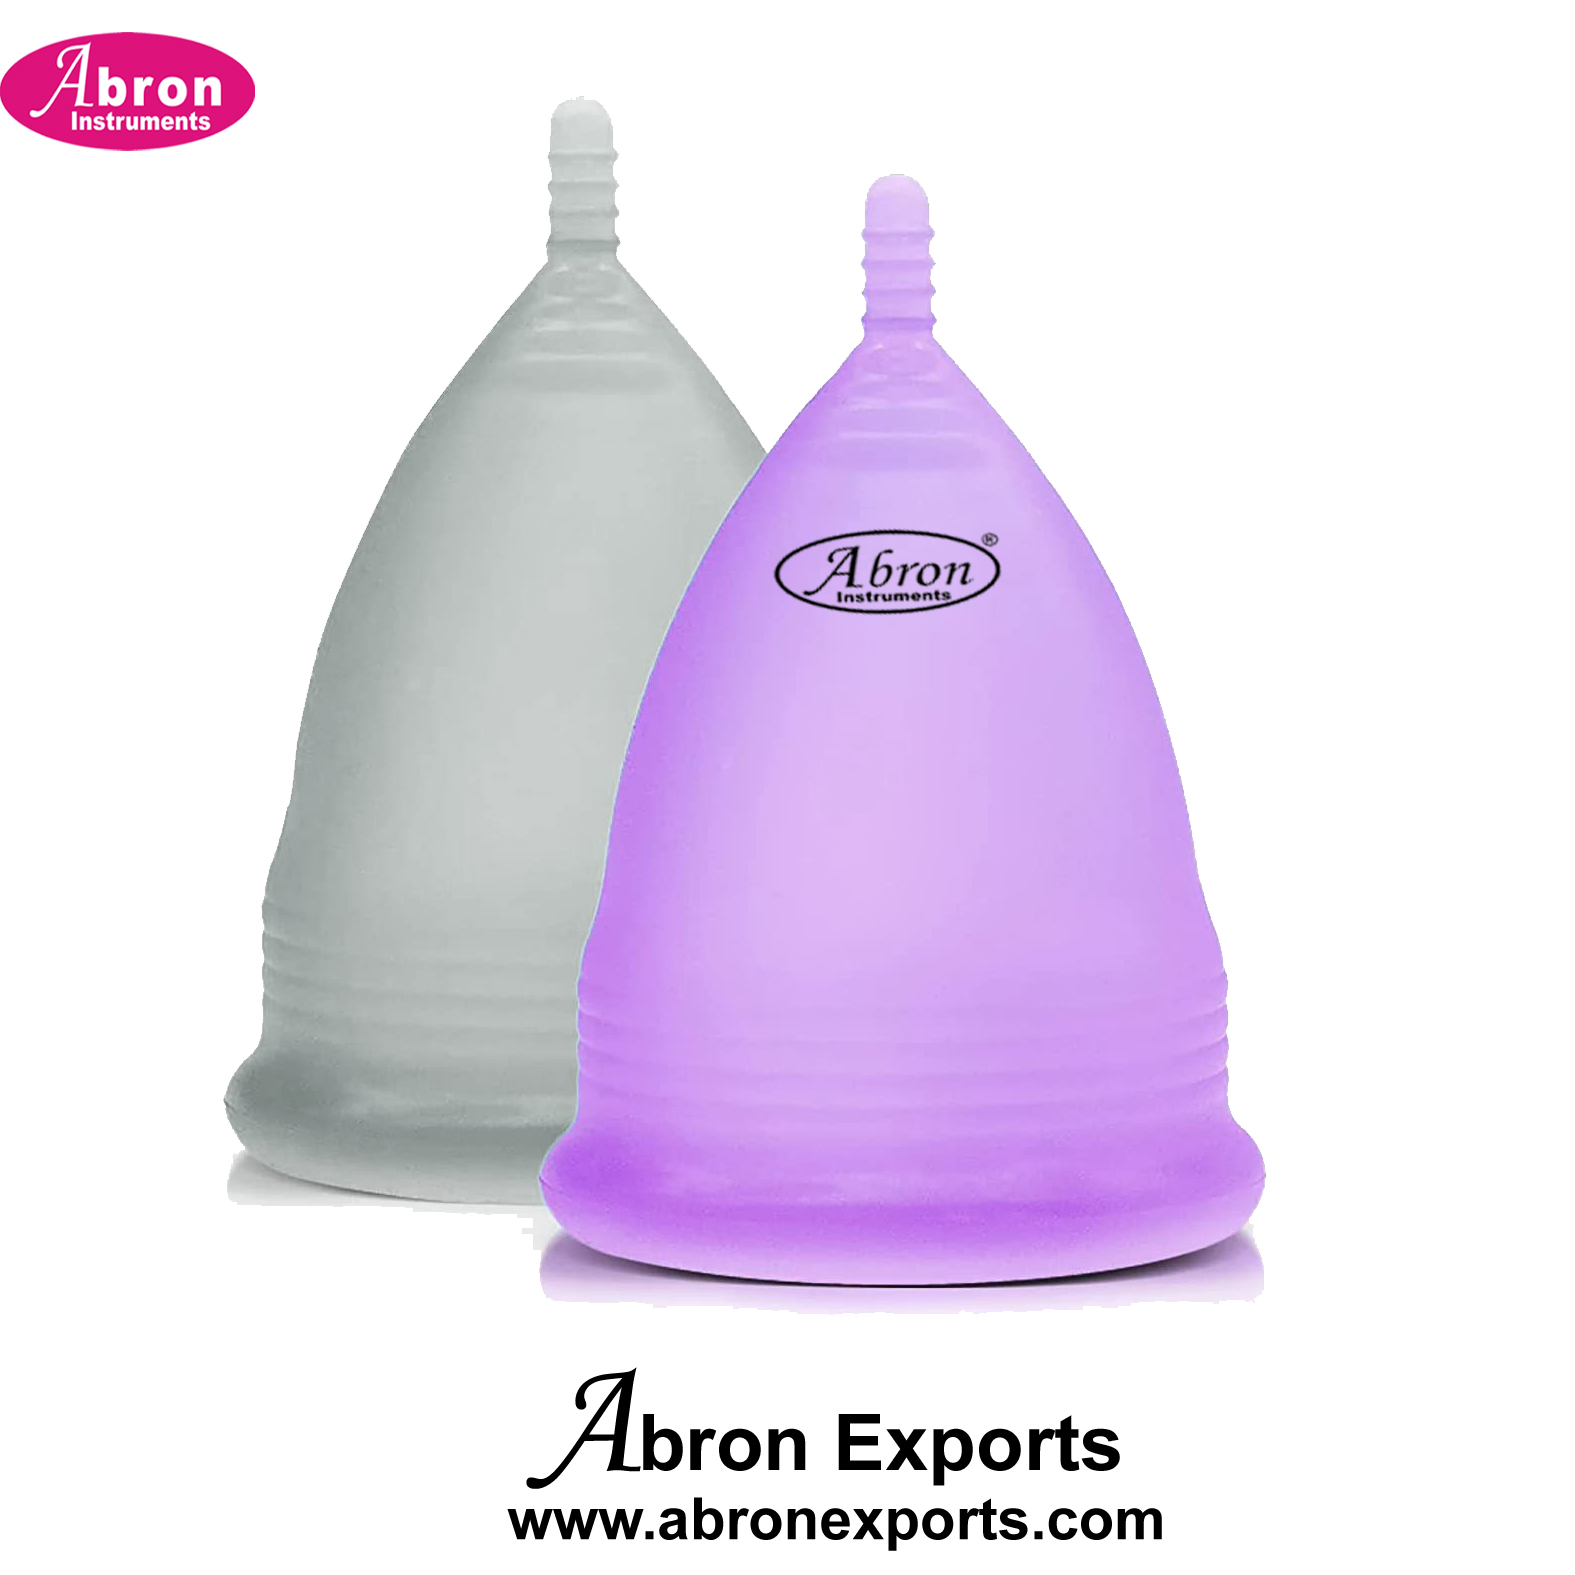 Menstrual Hygenine Product Cup for Women Medium Size With Leak Proof Ultra Soft Odour & Rash Free Medical Grade Silicone Protection Abron ABM-2476CU 